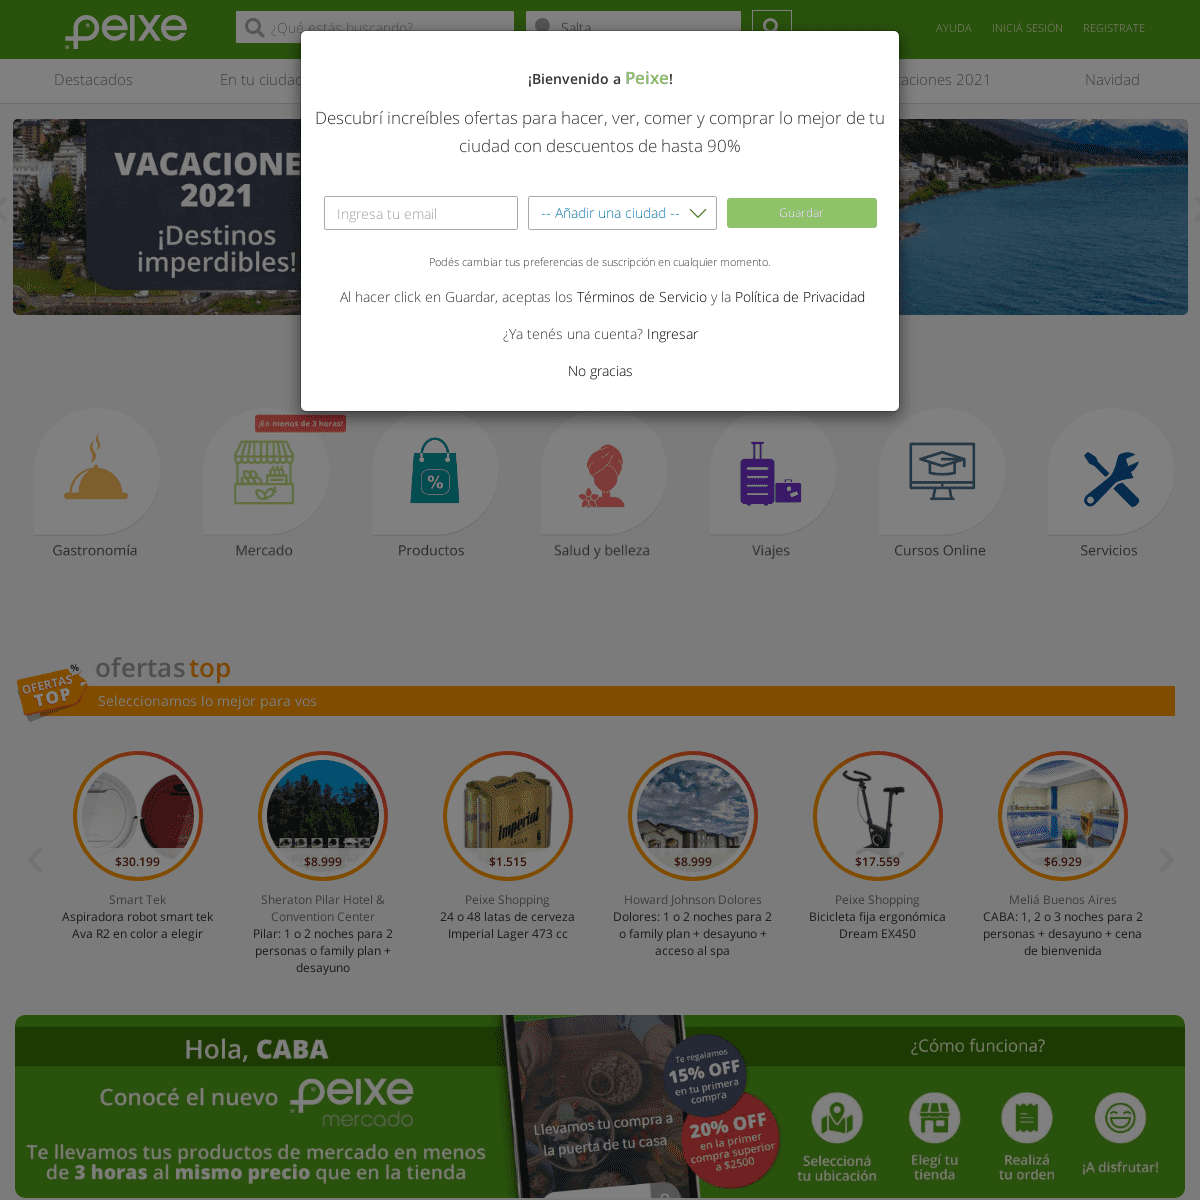 A complete backup of groupon.com.ar